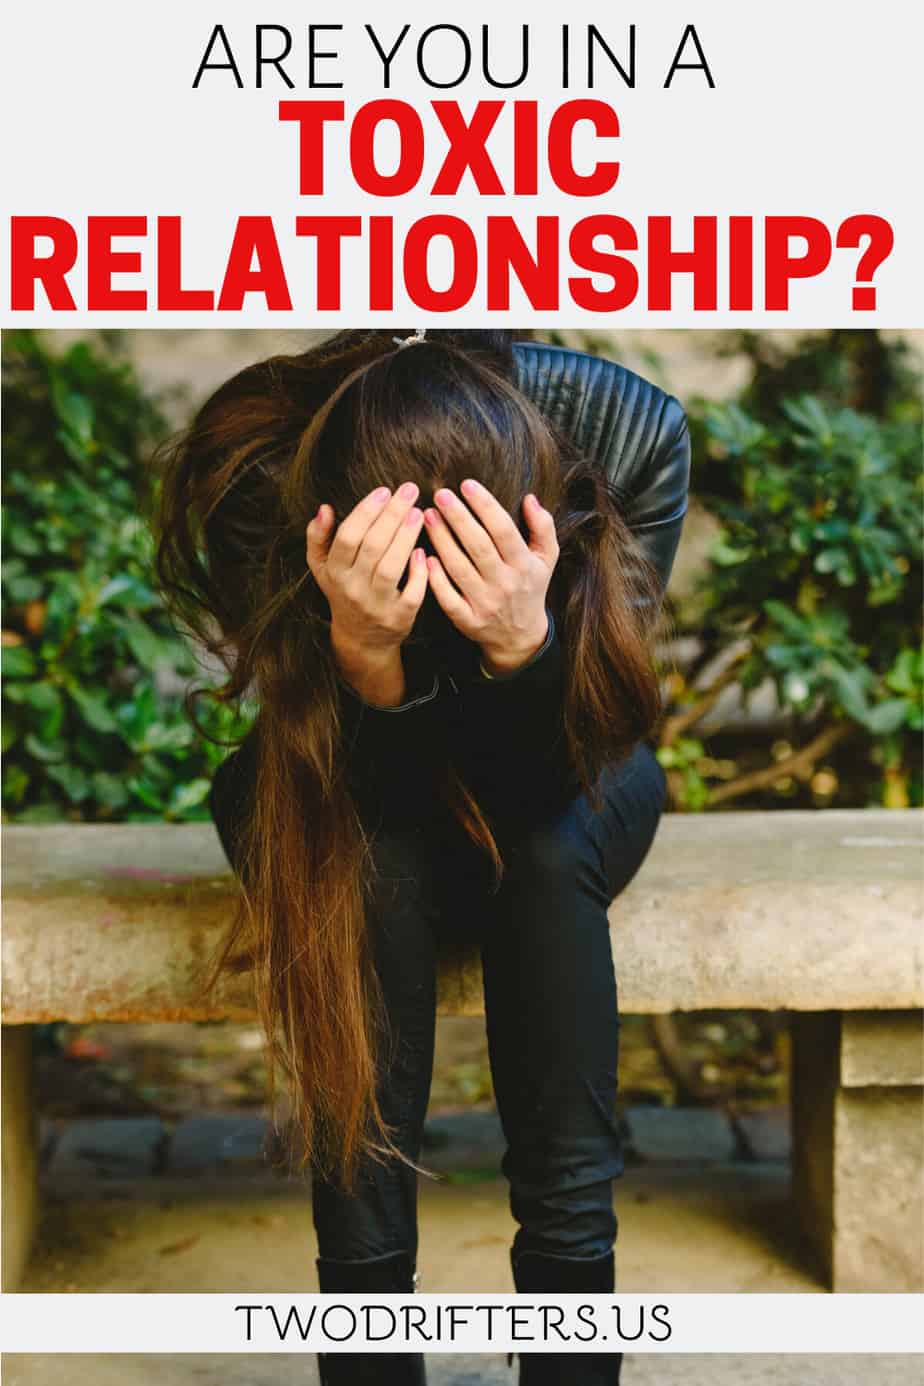 Pinterest social image that says "Are you in a toxic relationship?"